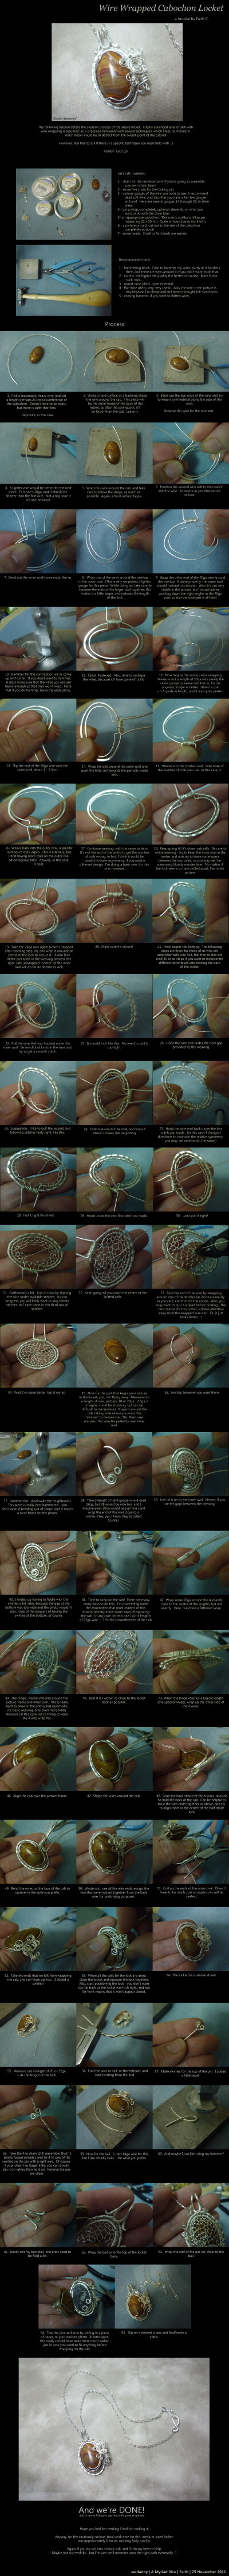 Wire Wrapped Cabochon Locket Tutorial by AMyriadVice